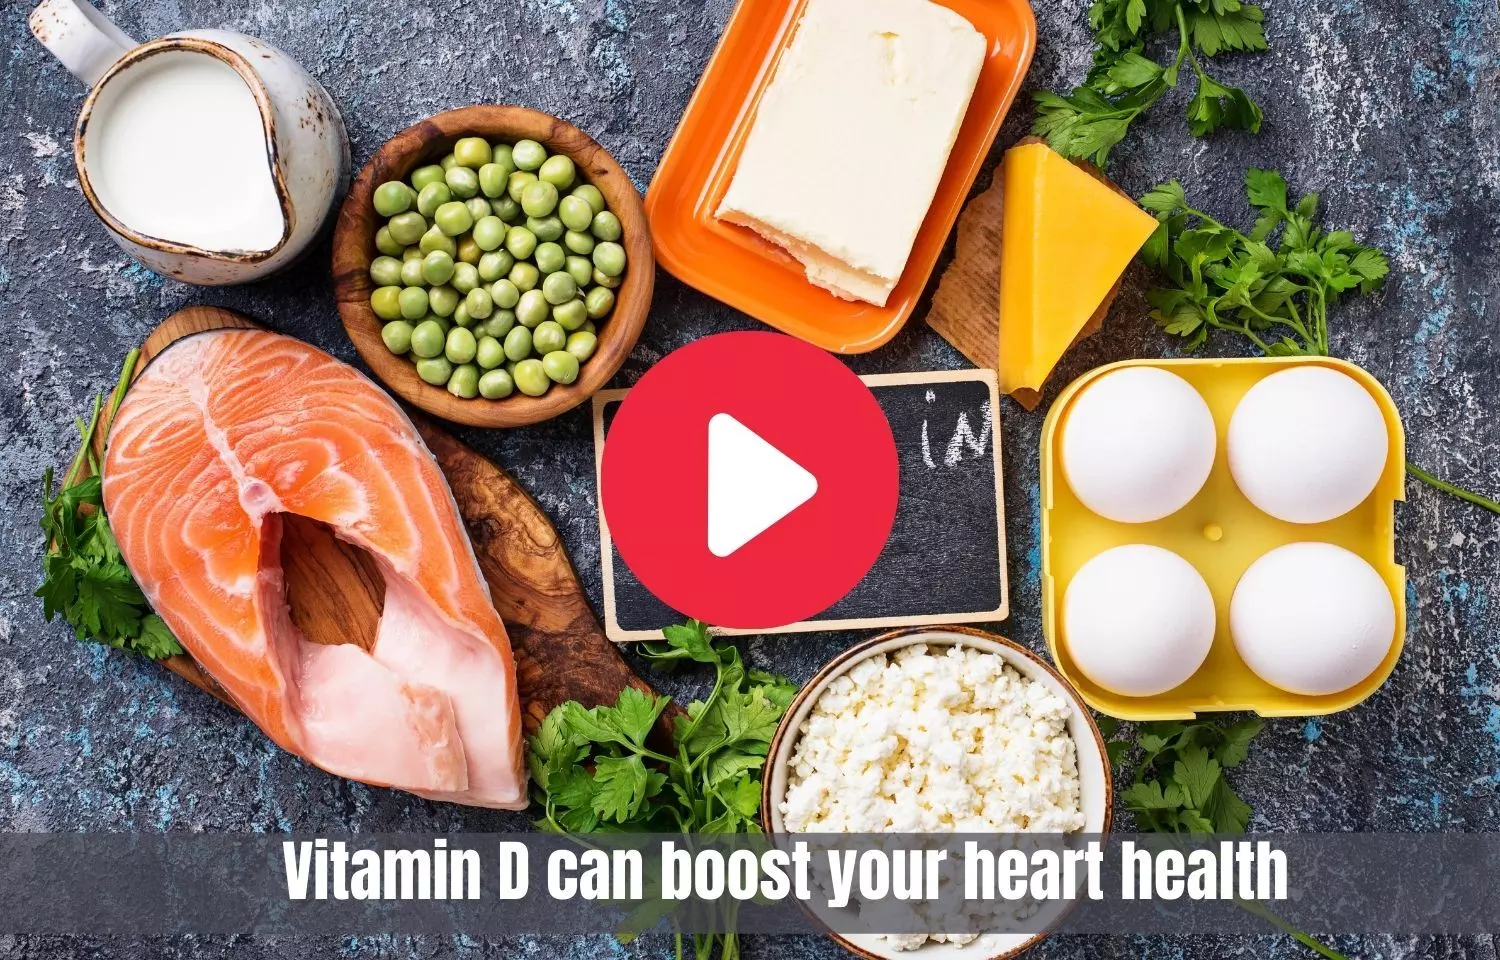 Vitamin D can boost your heart health